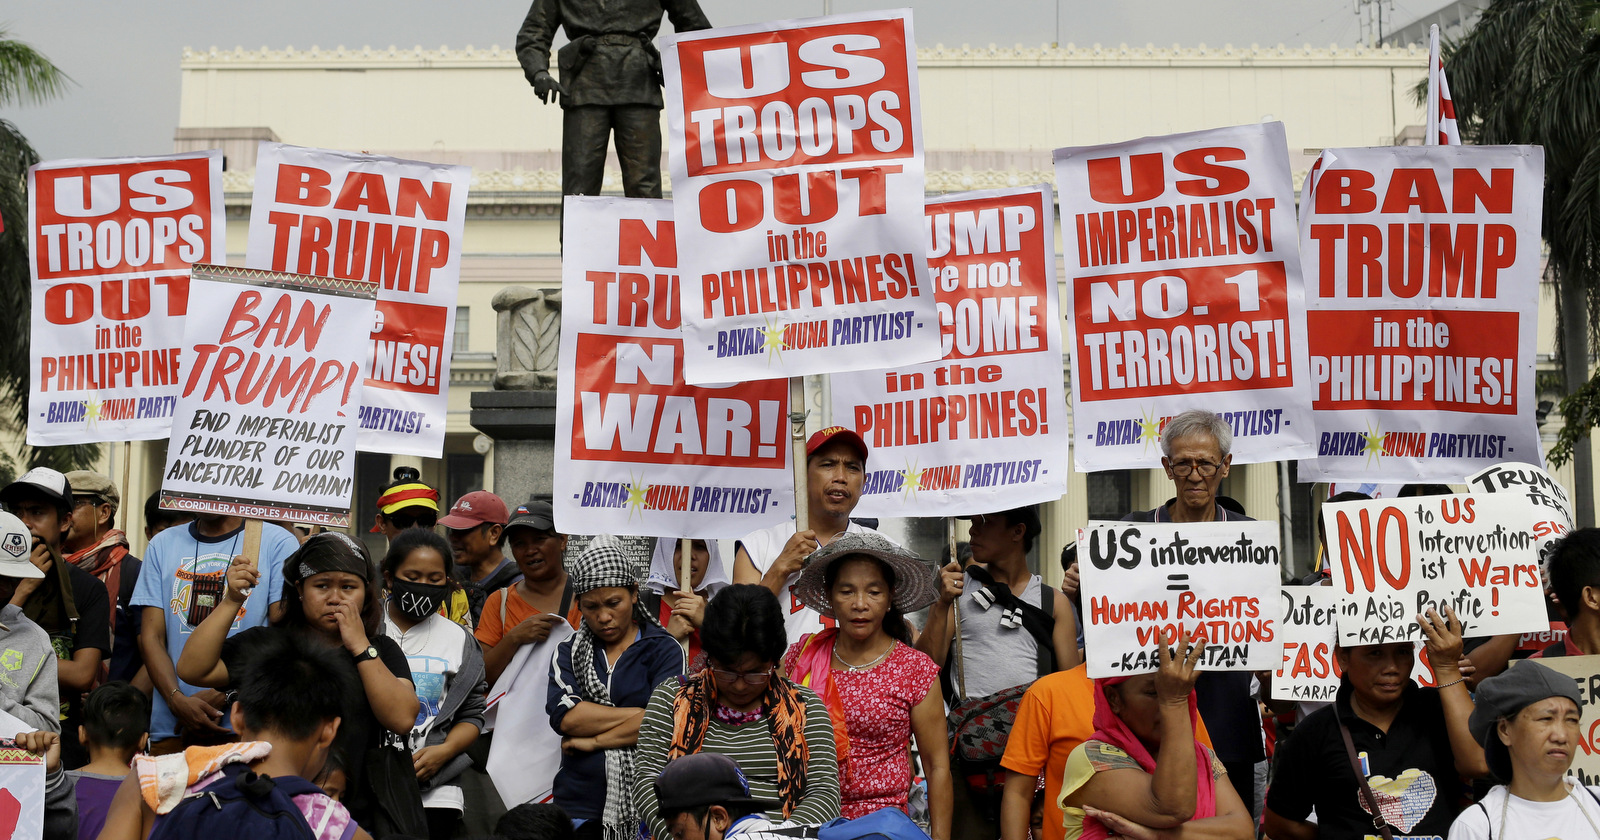 Demonstrators hold slogans during a rally to protest the visit of U.S. President Donald Trump as well as the 31st ASEAN Summit and Related Summits, Nov. 14, 2017 in Manila, Philippines. (AP/Aaron Favila)